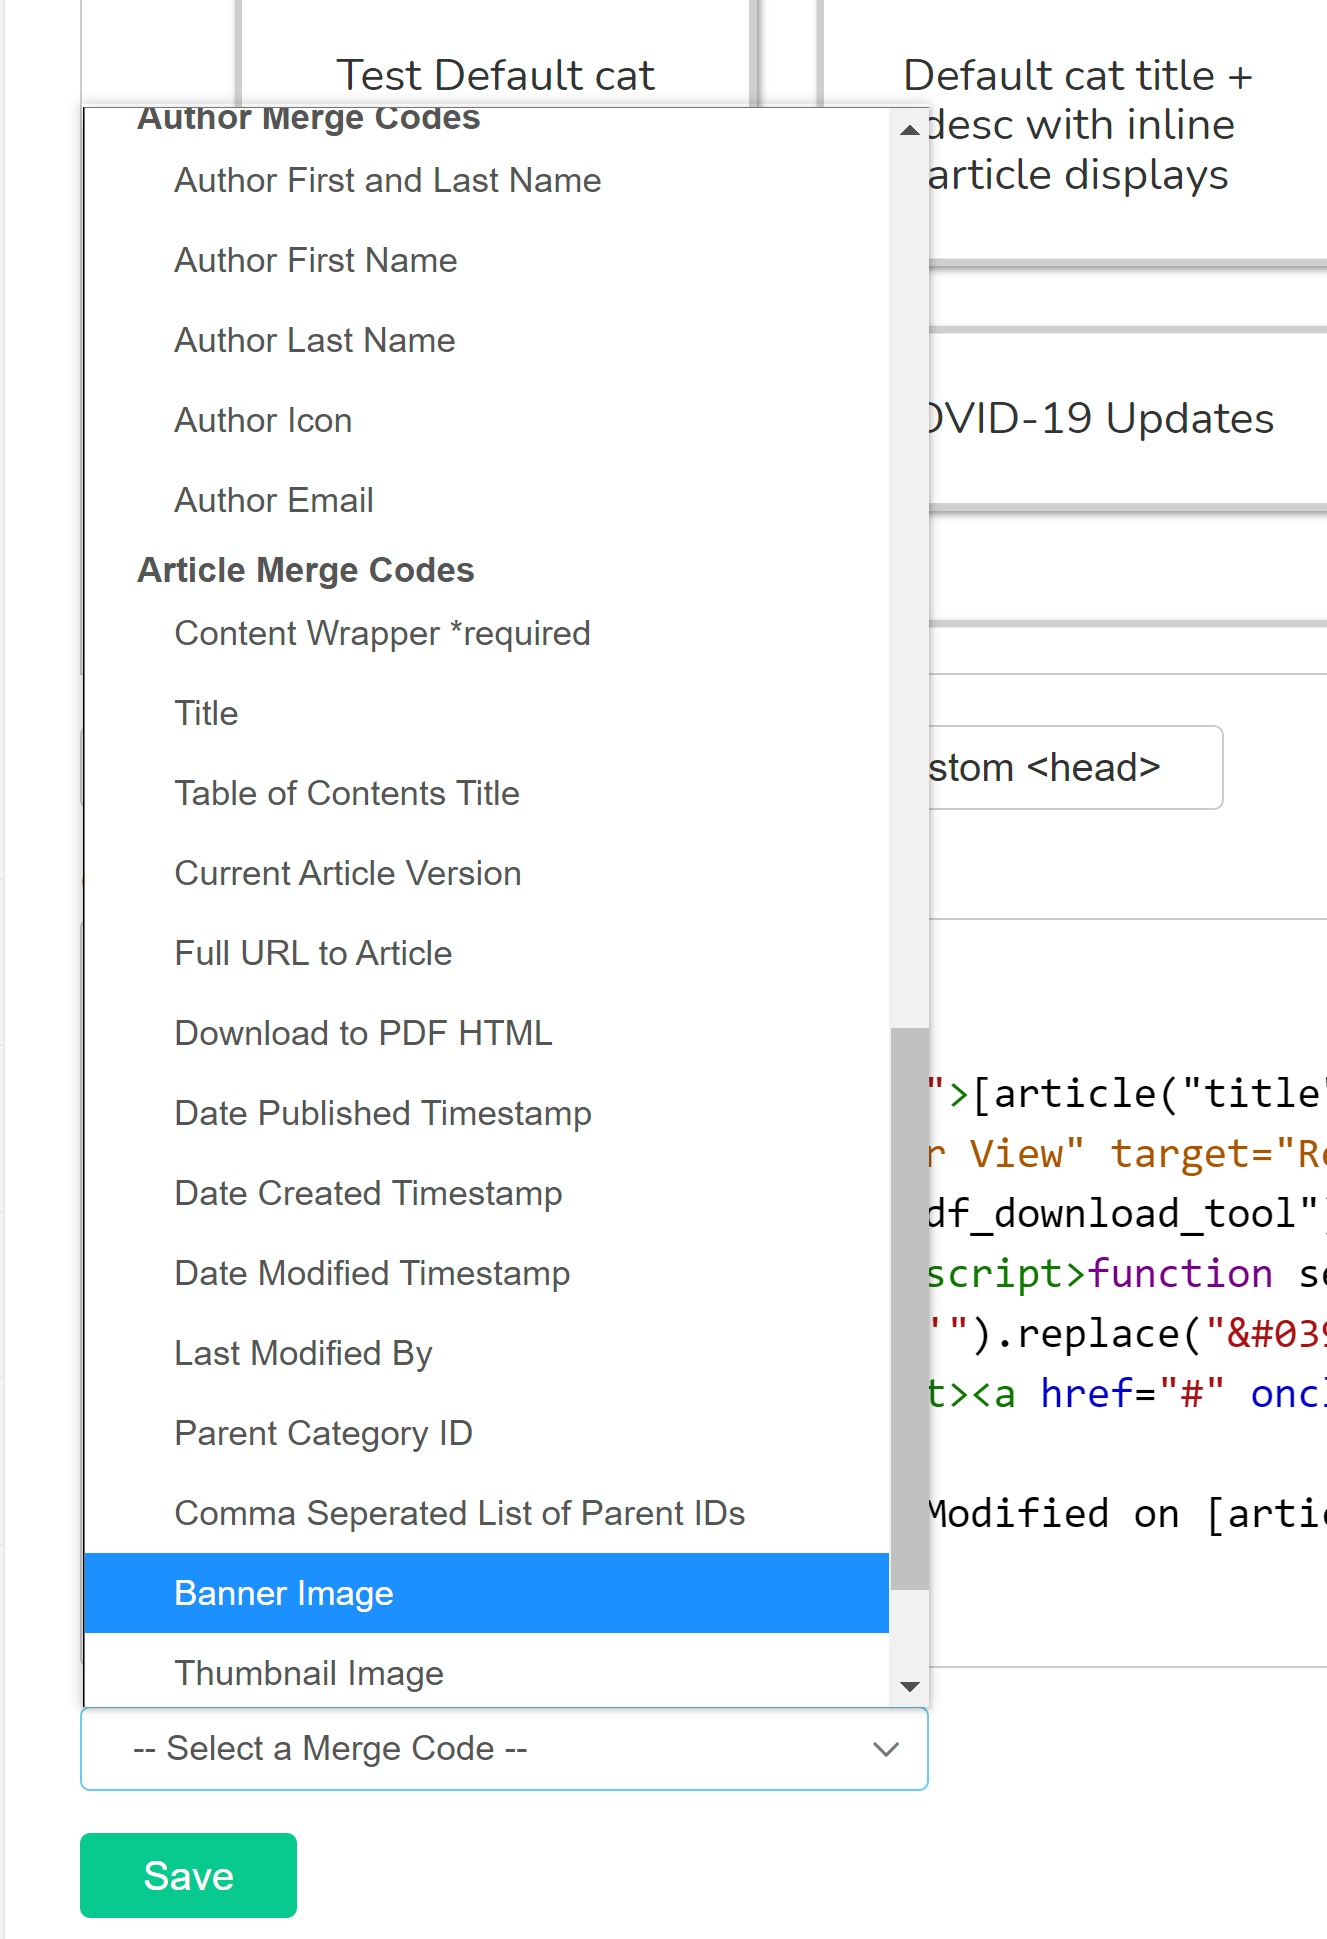 Screenshot of the Style Settings page with the Select a Merge Code dropdown expanded and the Banner Image item highlighted